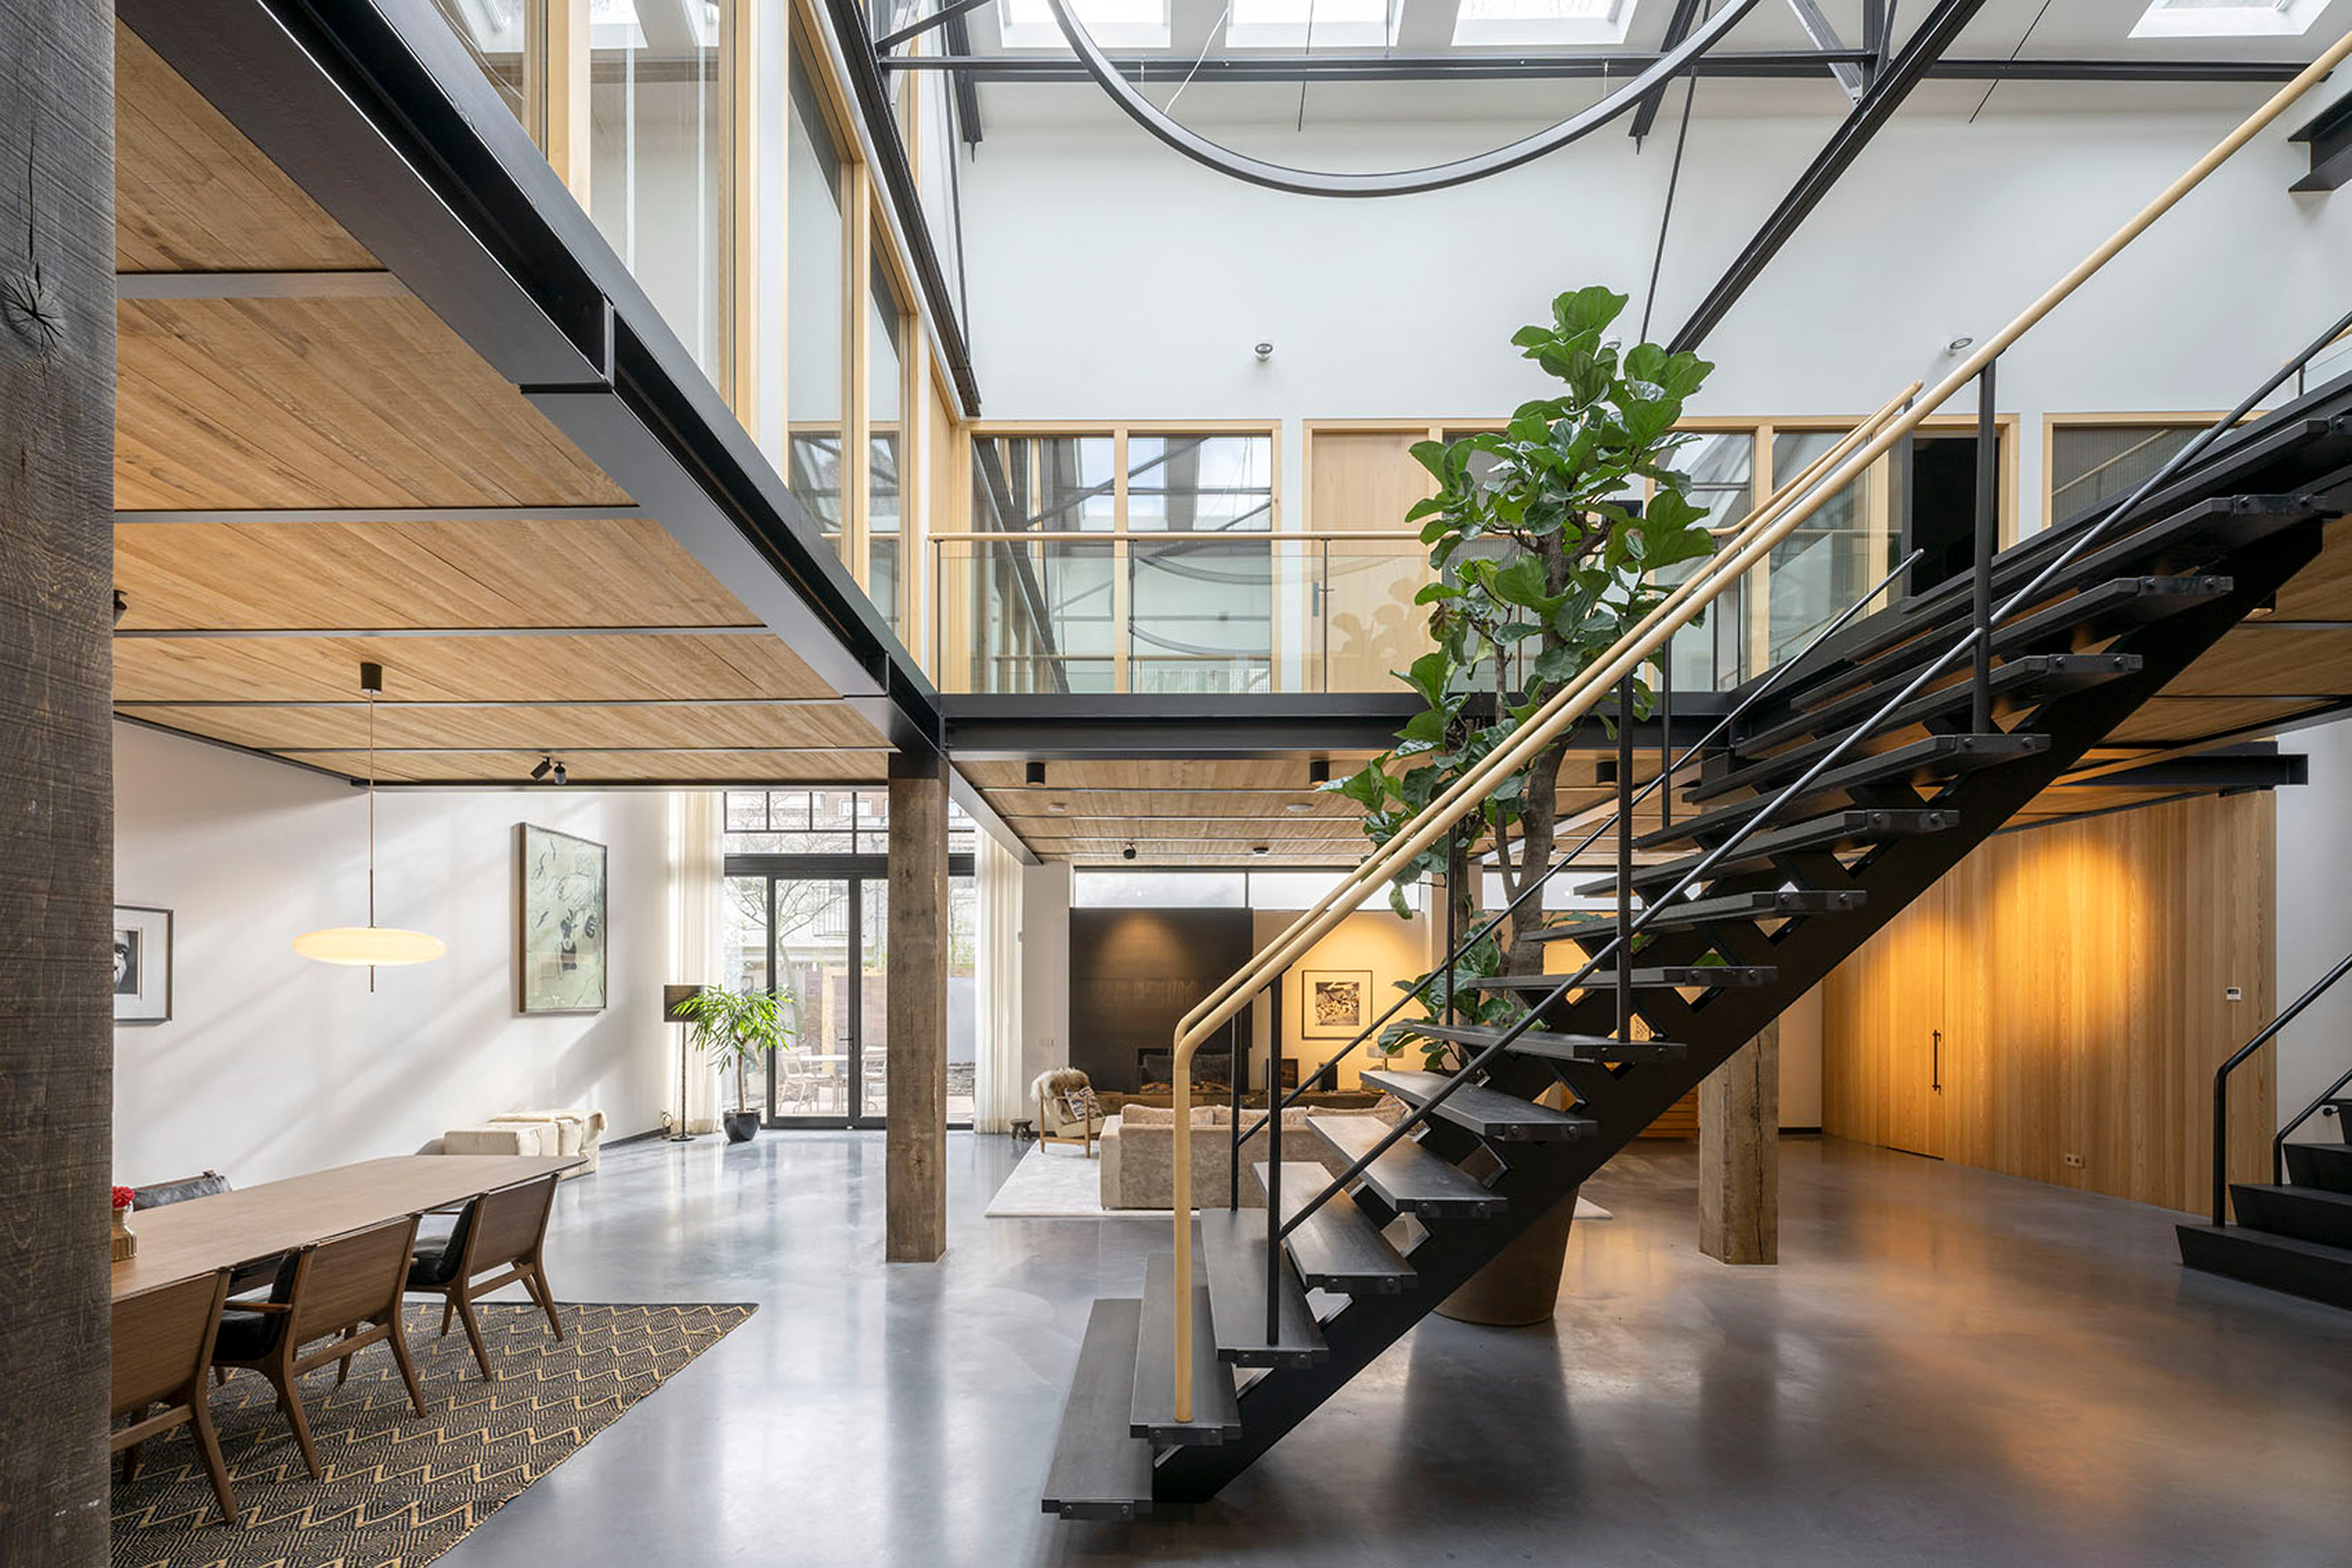 Inside of The Gymnasium apartment by Robbert De Goede